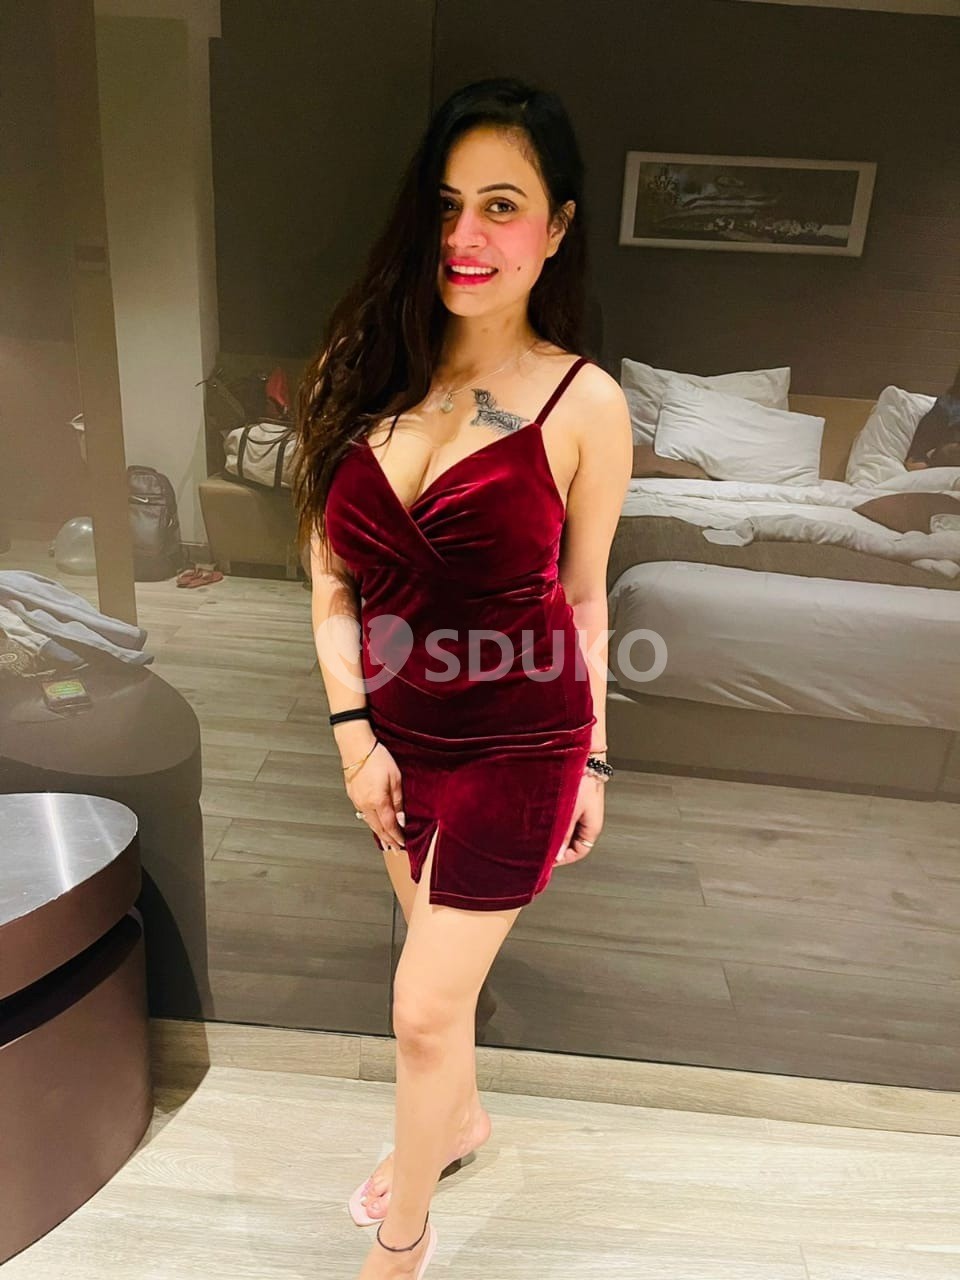 Malviya Nagar ❣️❣️Low price high profile college girl and aunty available any time available service genuine vip